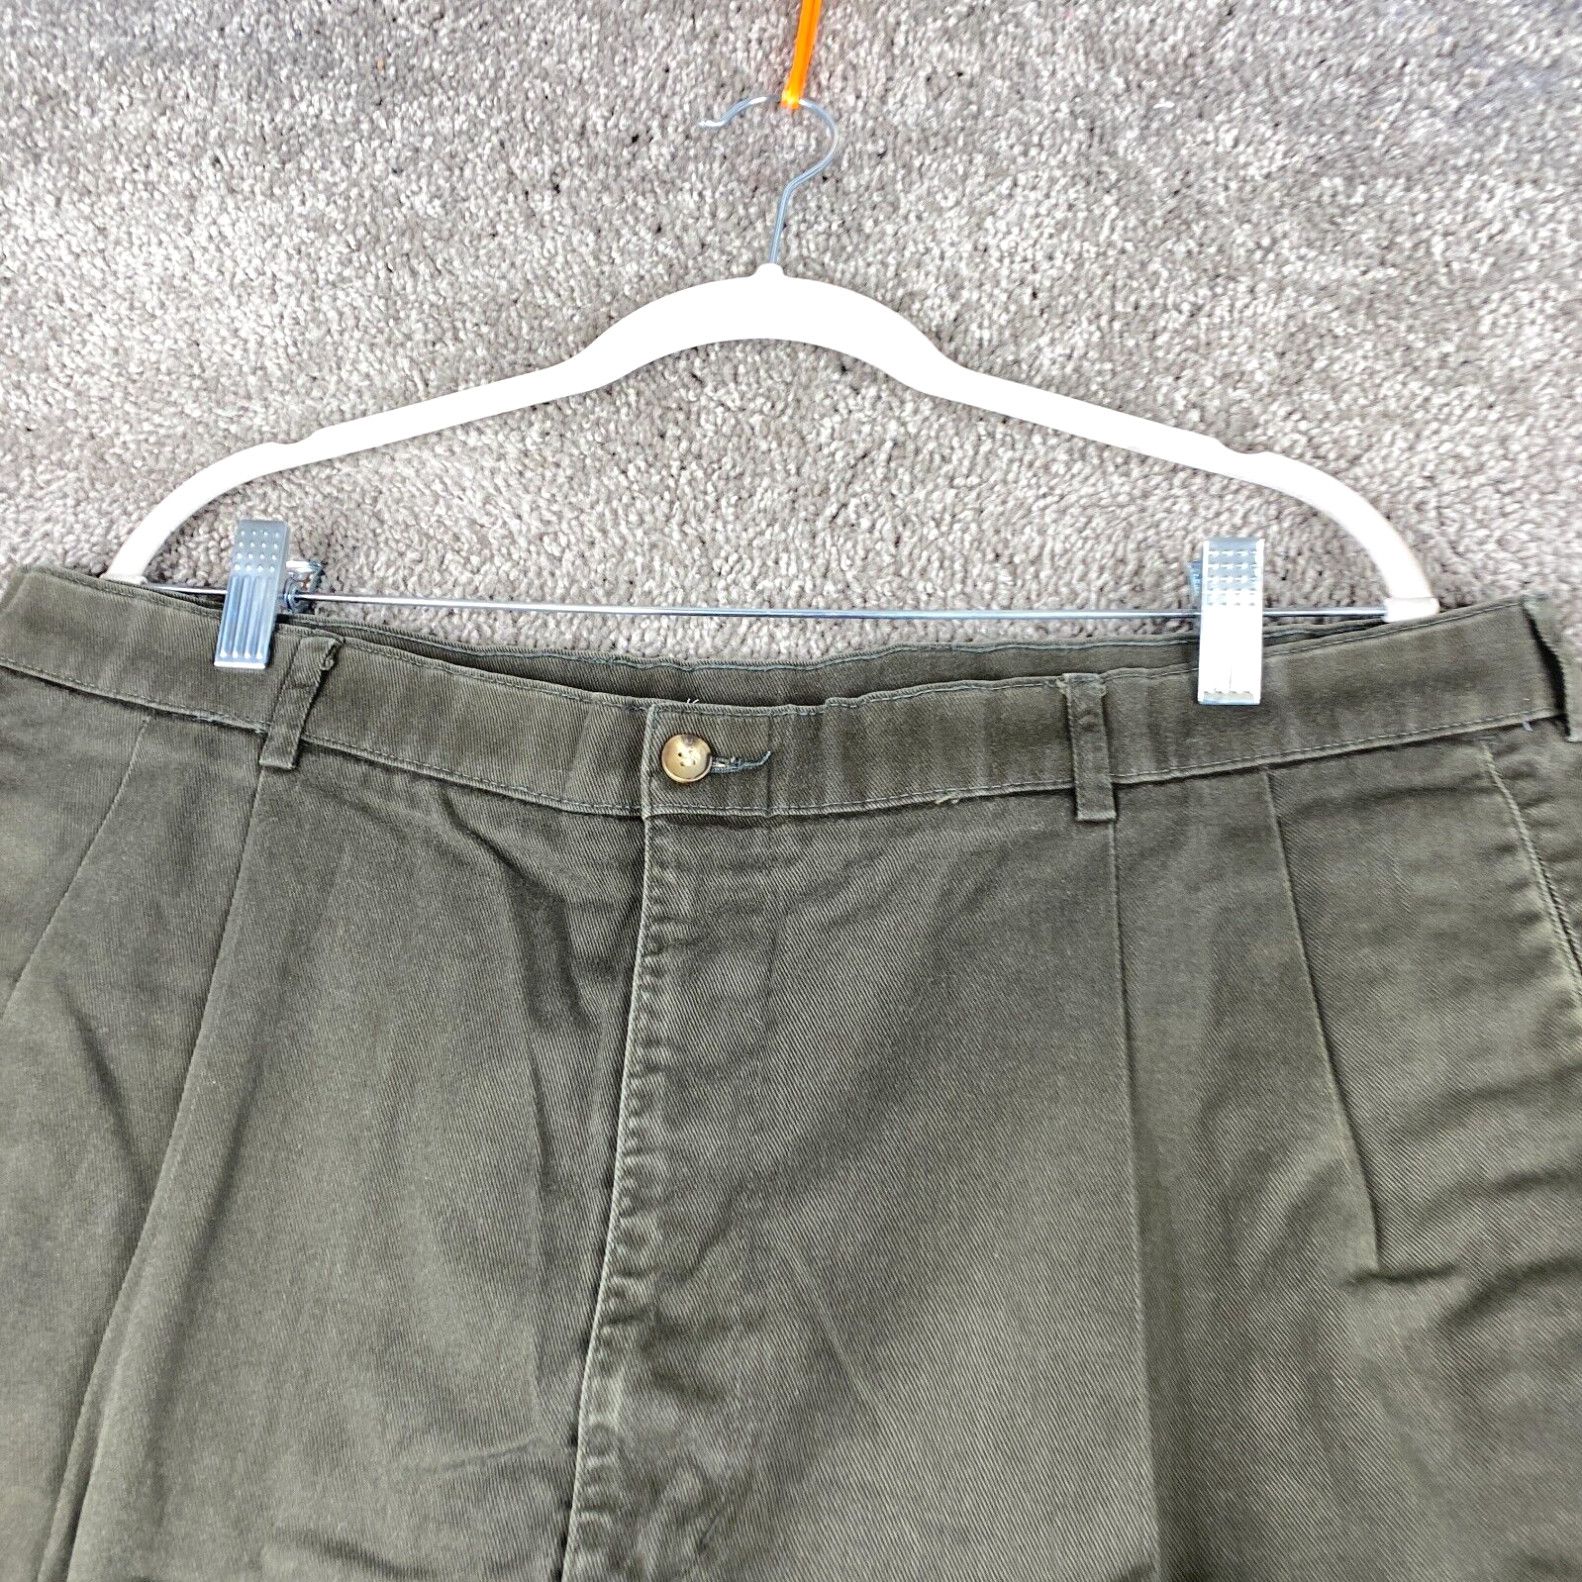 Haggar Haggar Clothing Co. Chino Shorts Men's Size 40 Green Pleated Front Pure Cotton Size US 40 / EU 56 - 2 Preview